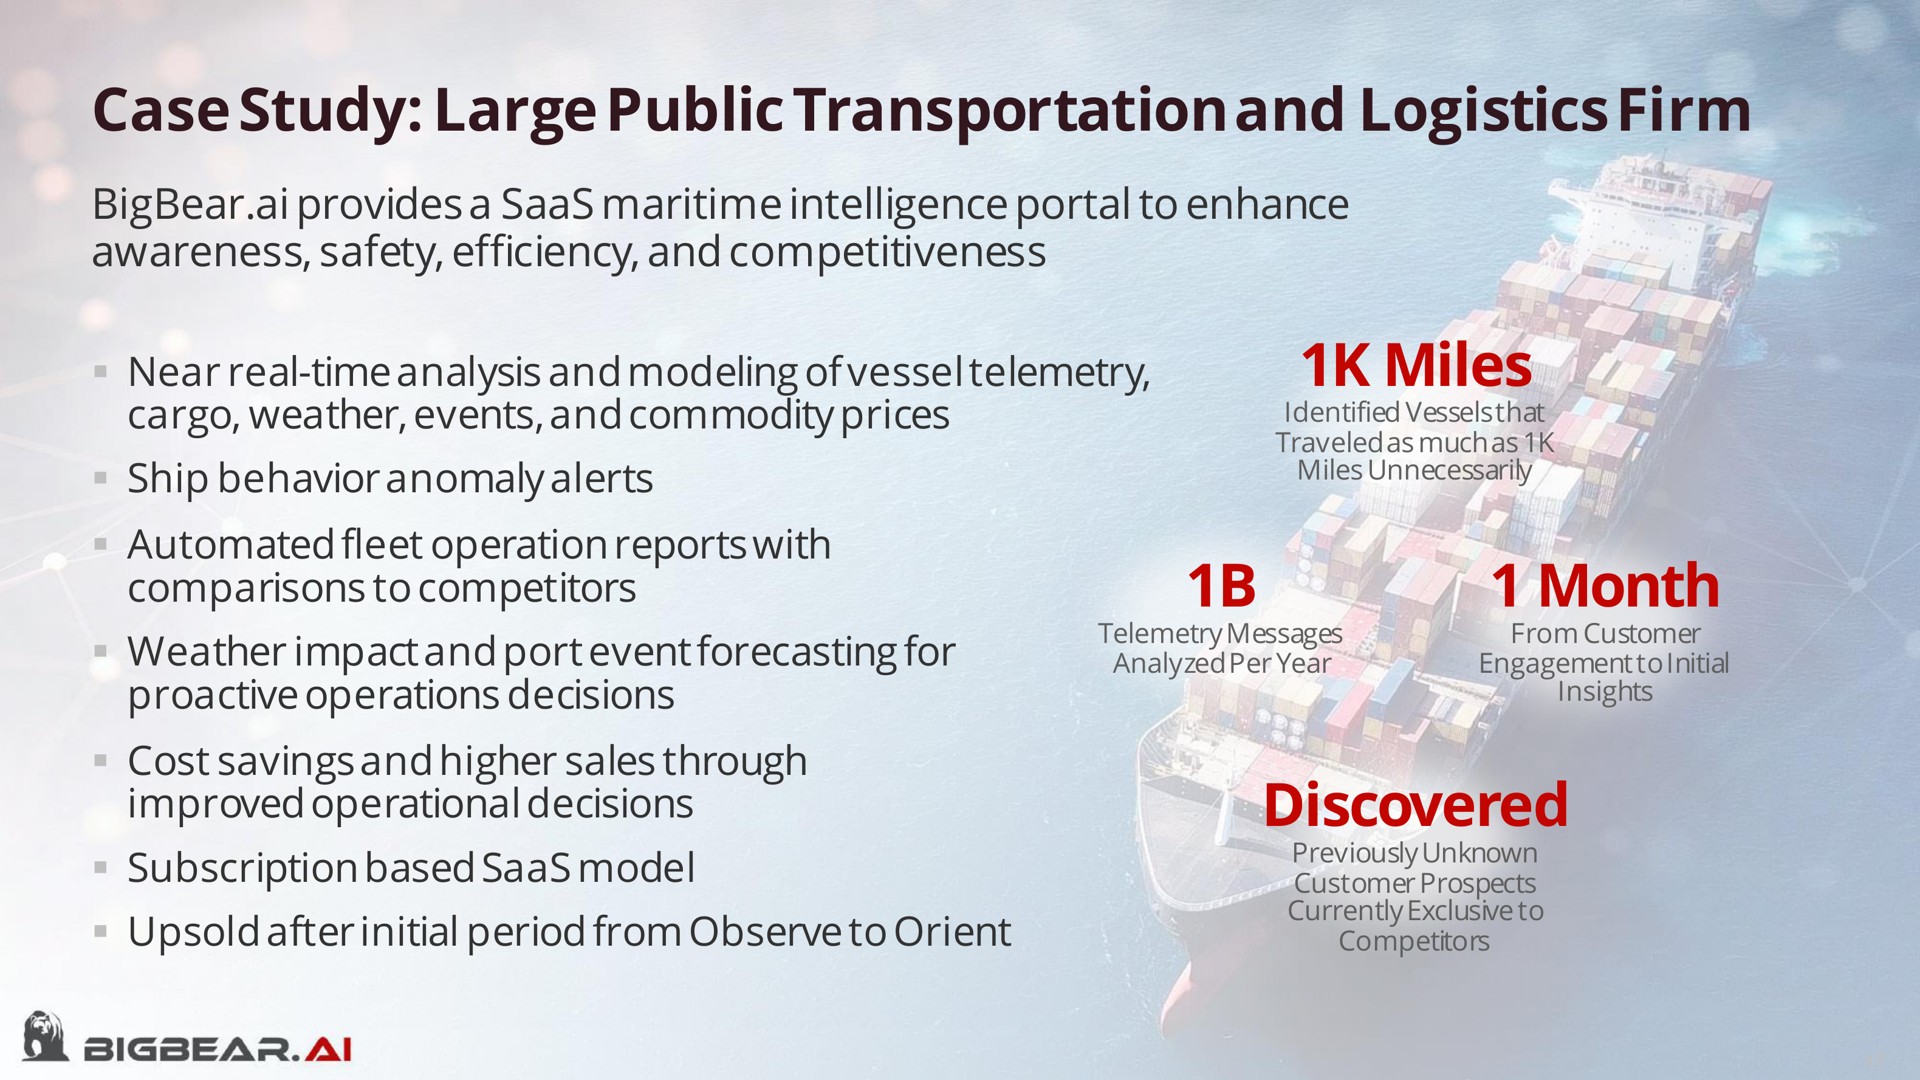 case study large public transportation and logistics firm miles month discovered | Bigbear AI